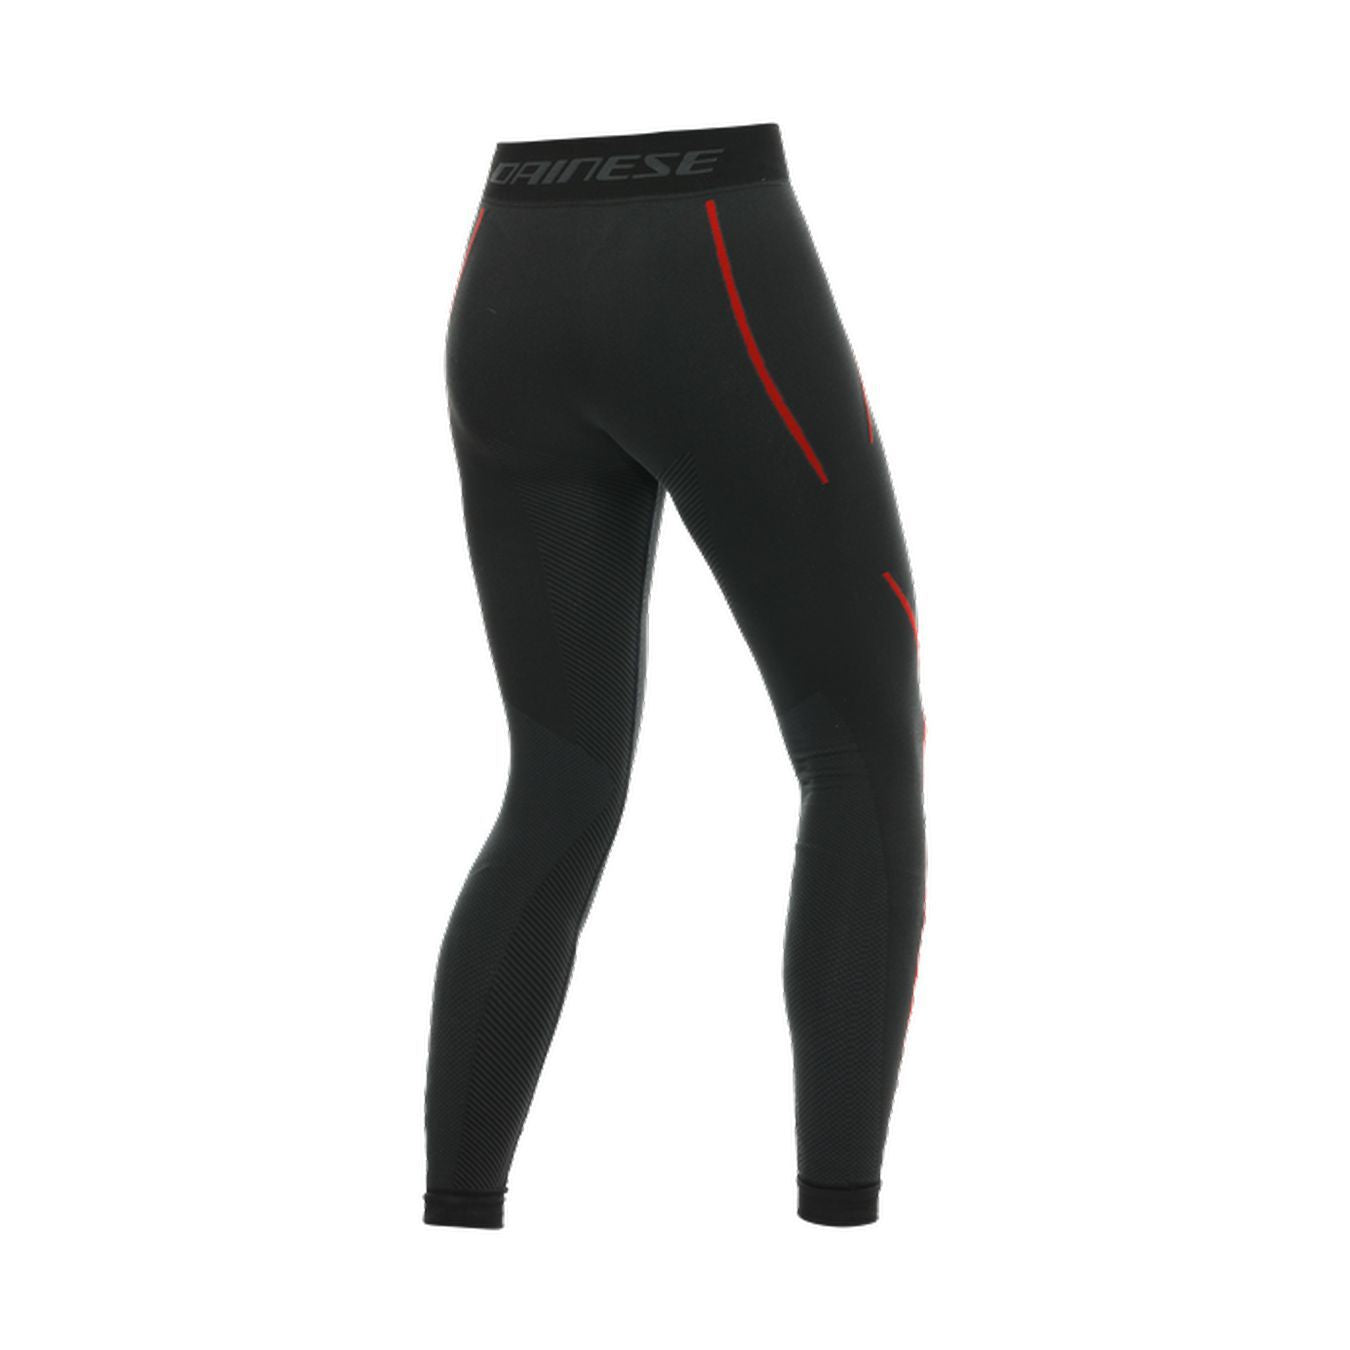 Pantalone Termico Dainese Thermo Lady Black/red